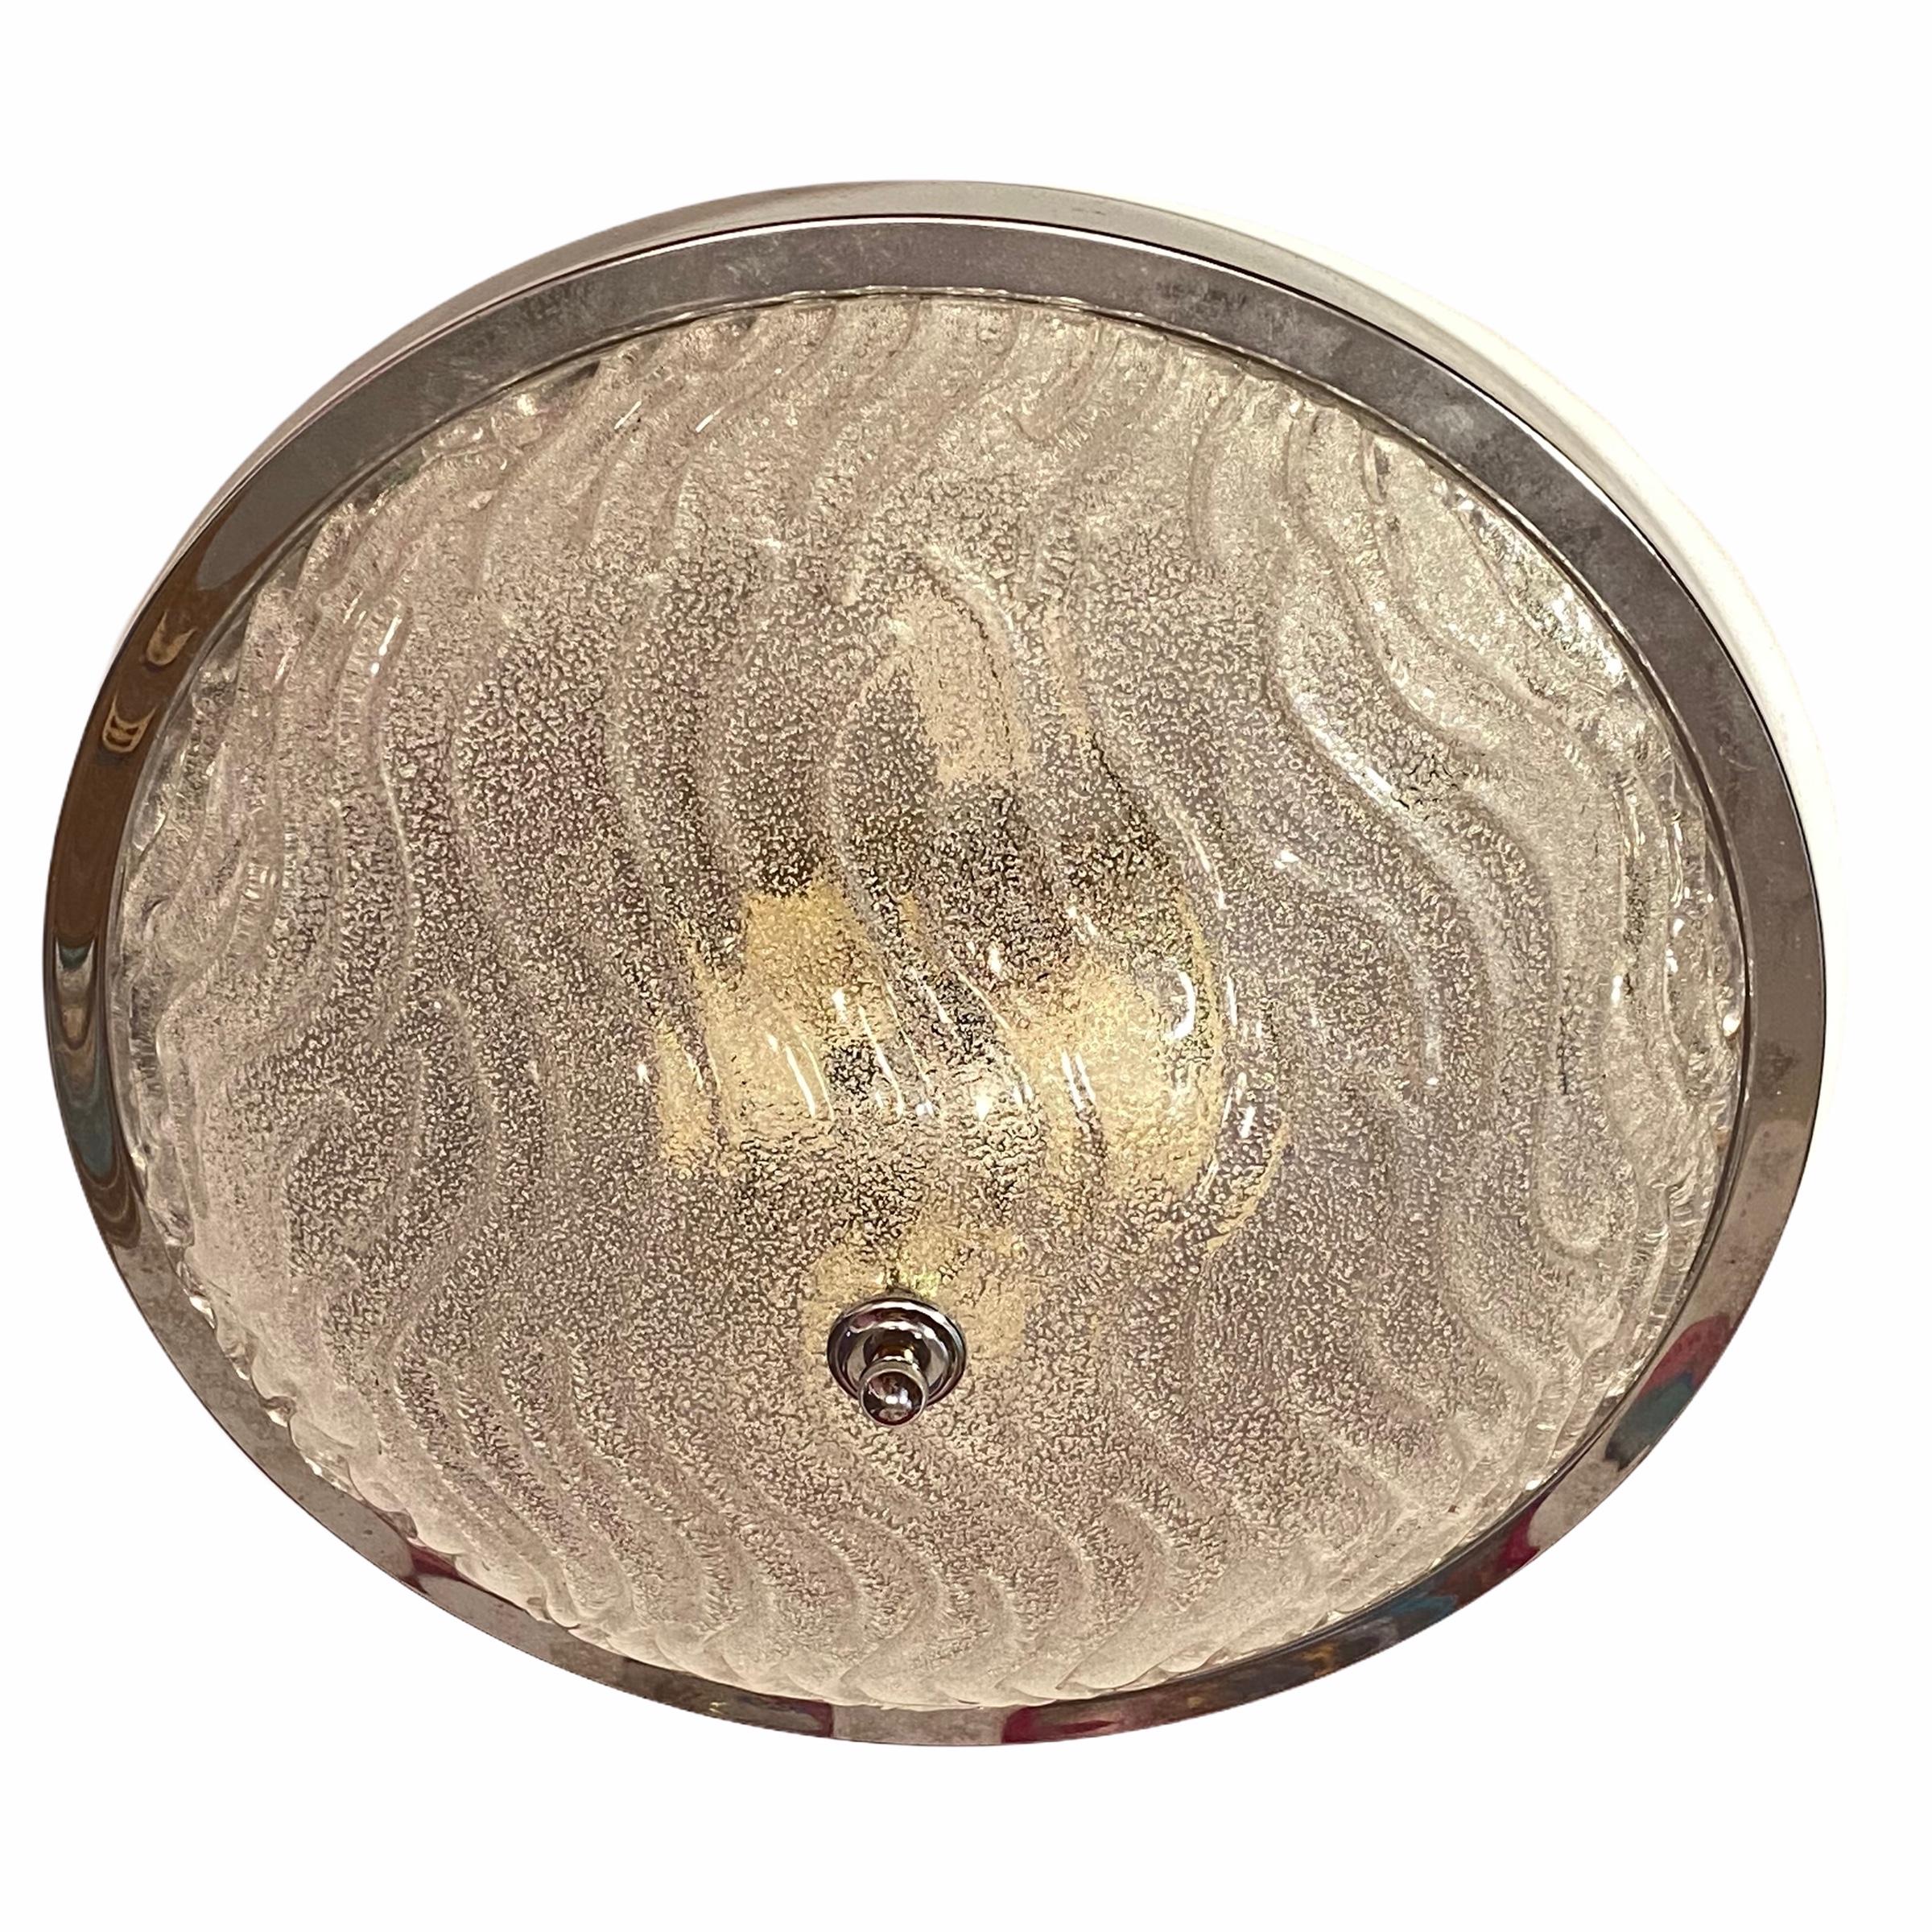 A stunning large chrome and Murano glass flush mount by Fischer Leuchten. Very heavy Murano wave pattern glass. The flush mount requires three European E27 Edison bulbs, each up to 60 watts.